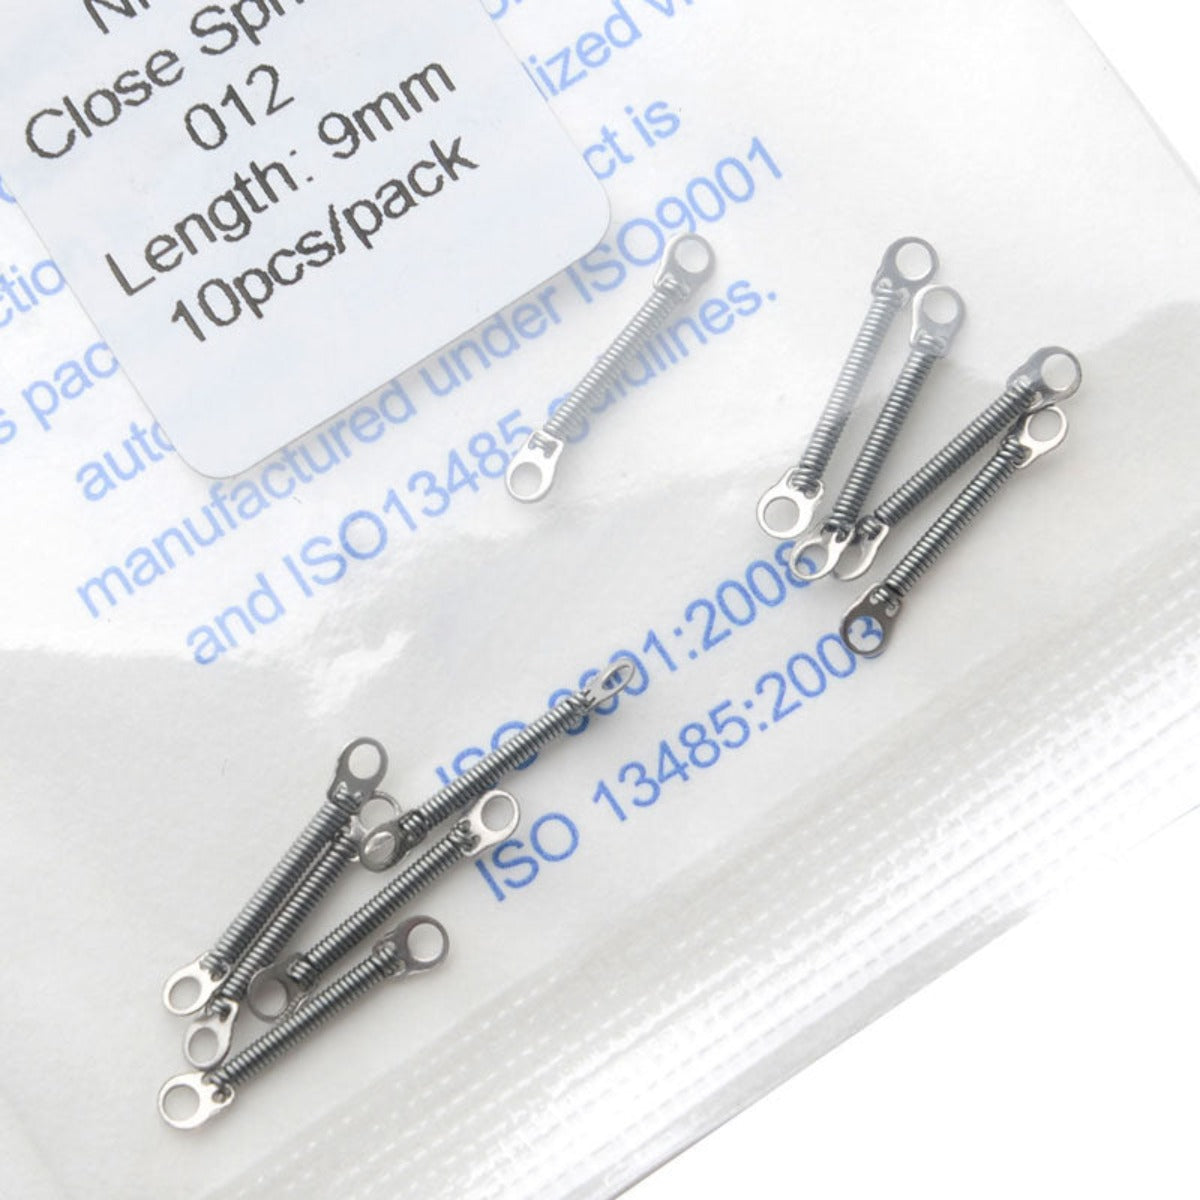 Orthodontic 0.012 9mm Closed Coil Spring 10pcs/Pack - pairaydental.com